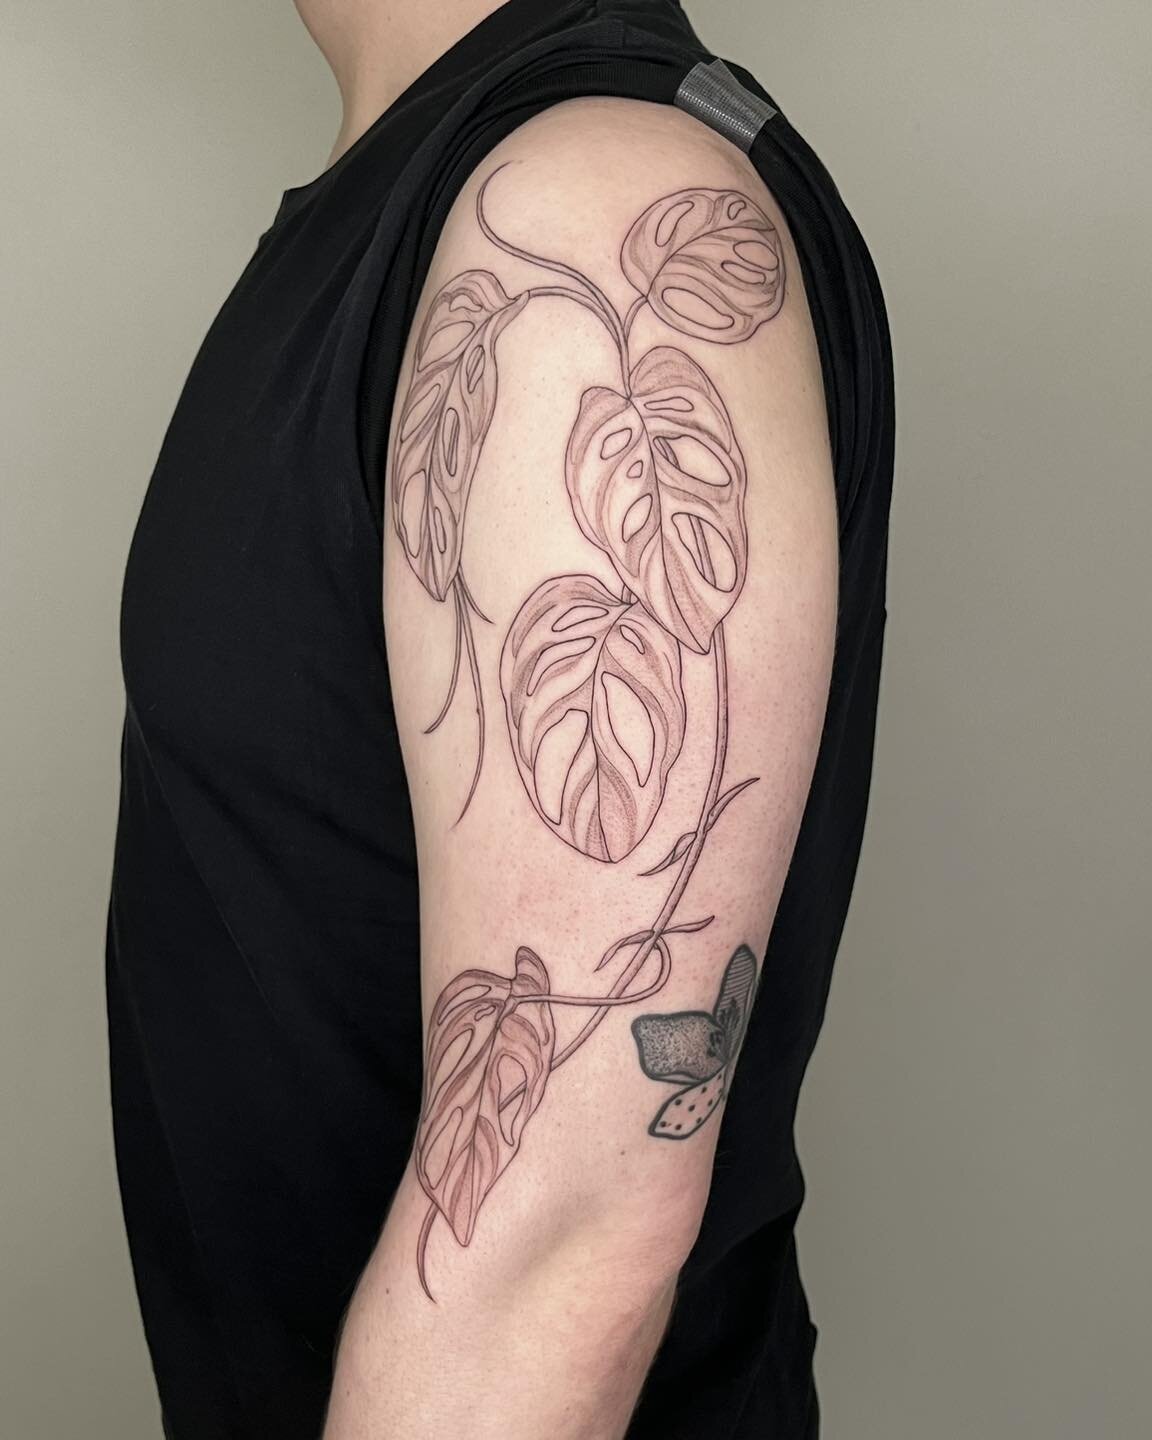 Monstera adansonii 🪴 Always stoked to do large scale vines like this! Thanks, Nick!! &bull; Currently booking for May ✨
&bull;
&bull;
&bull;
#bayareatattoo #bayareatattooartist #sftattooartist #sftattoo #oaklandtattoo #berkeleytattoo #planttattoo #m